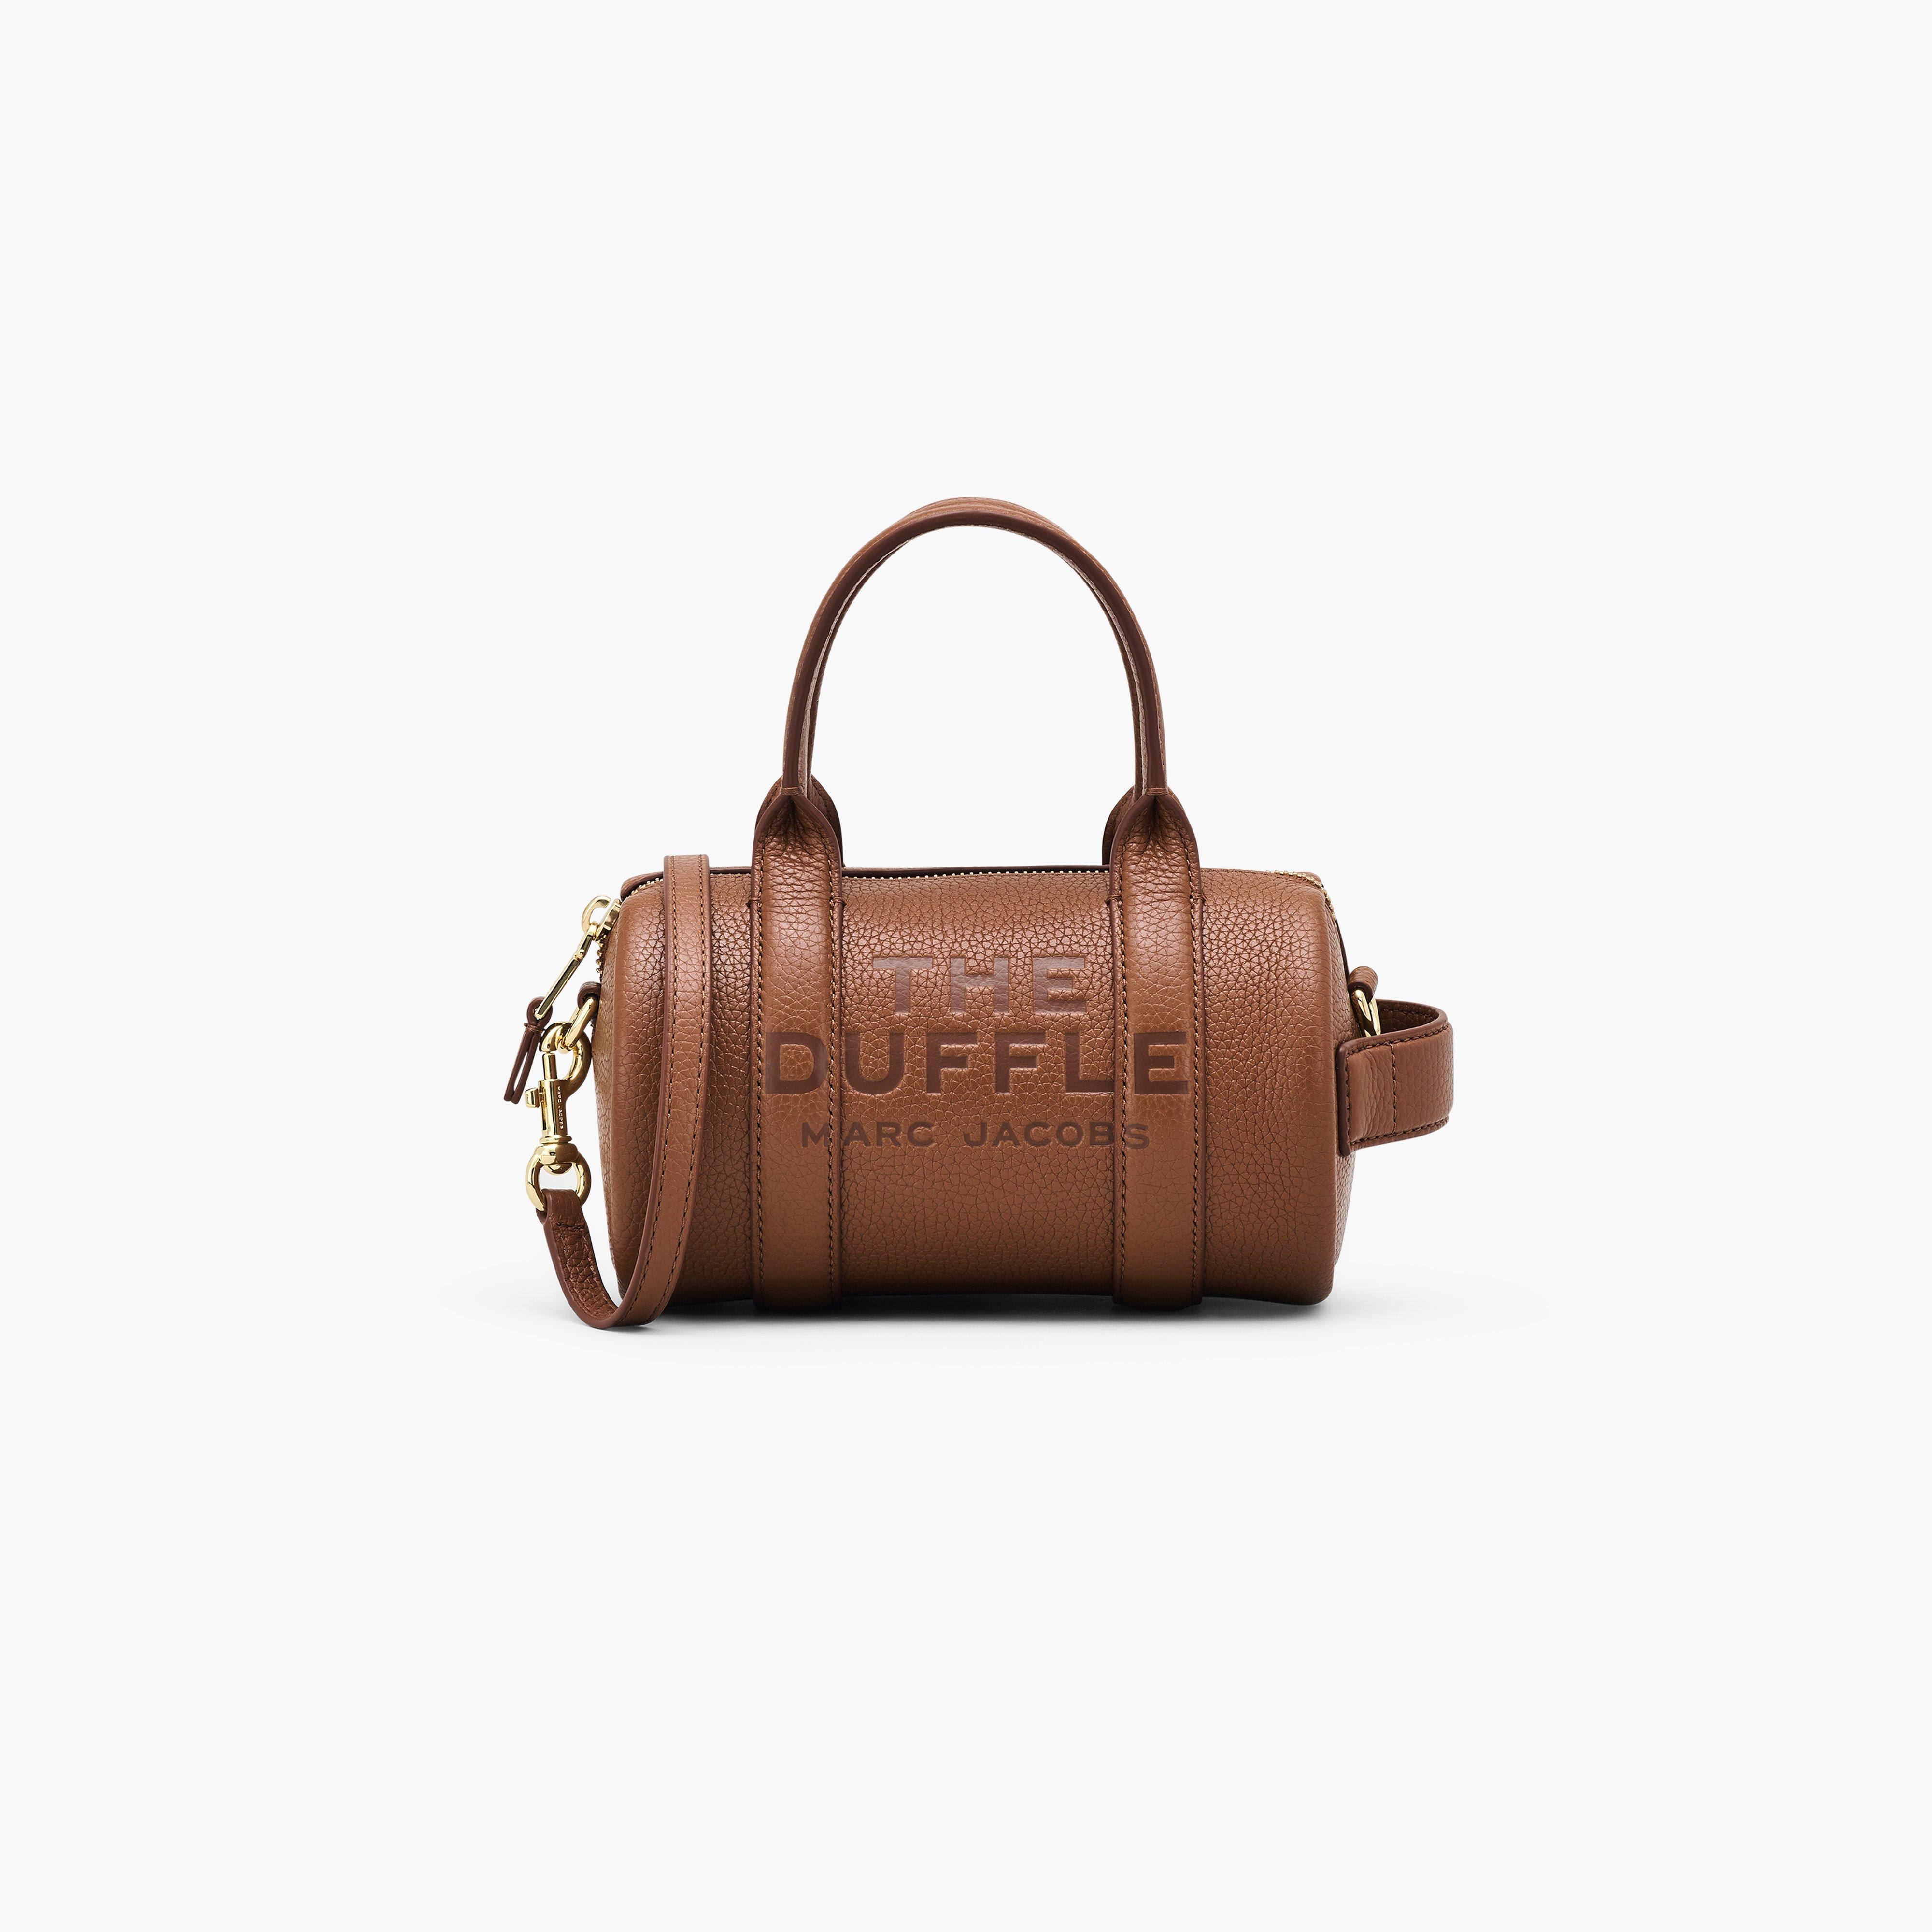 Marc by Marc jacobs The Leather Mini Duffle Bag,ARGAN OIL